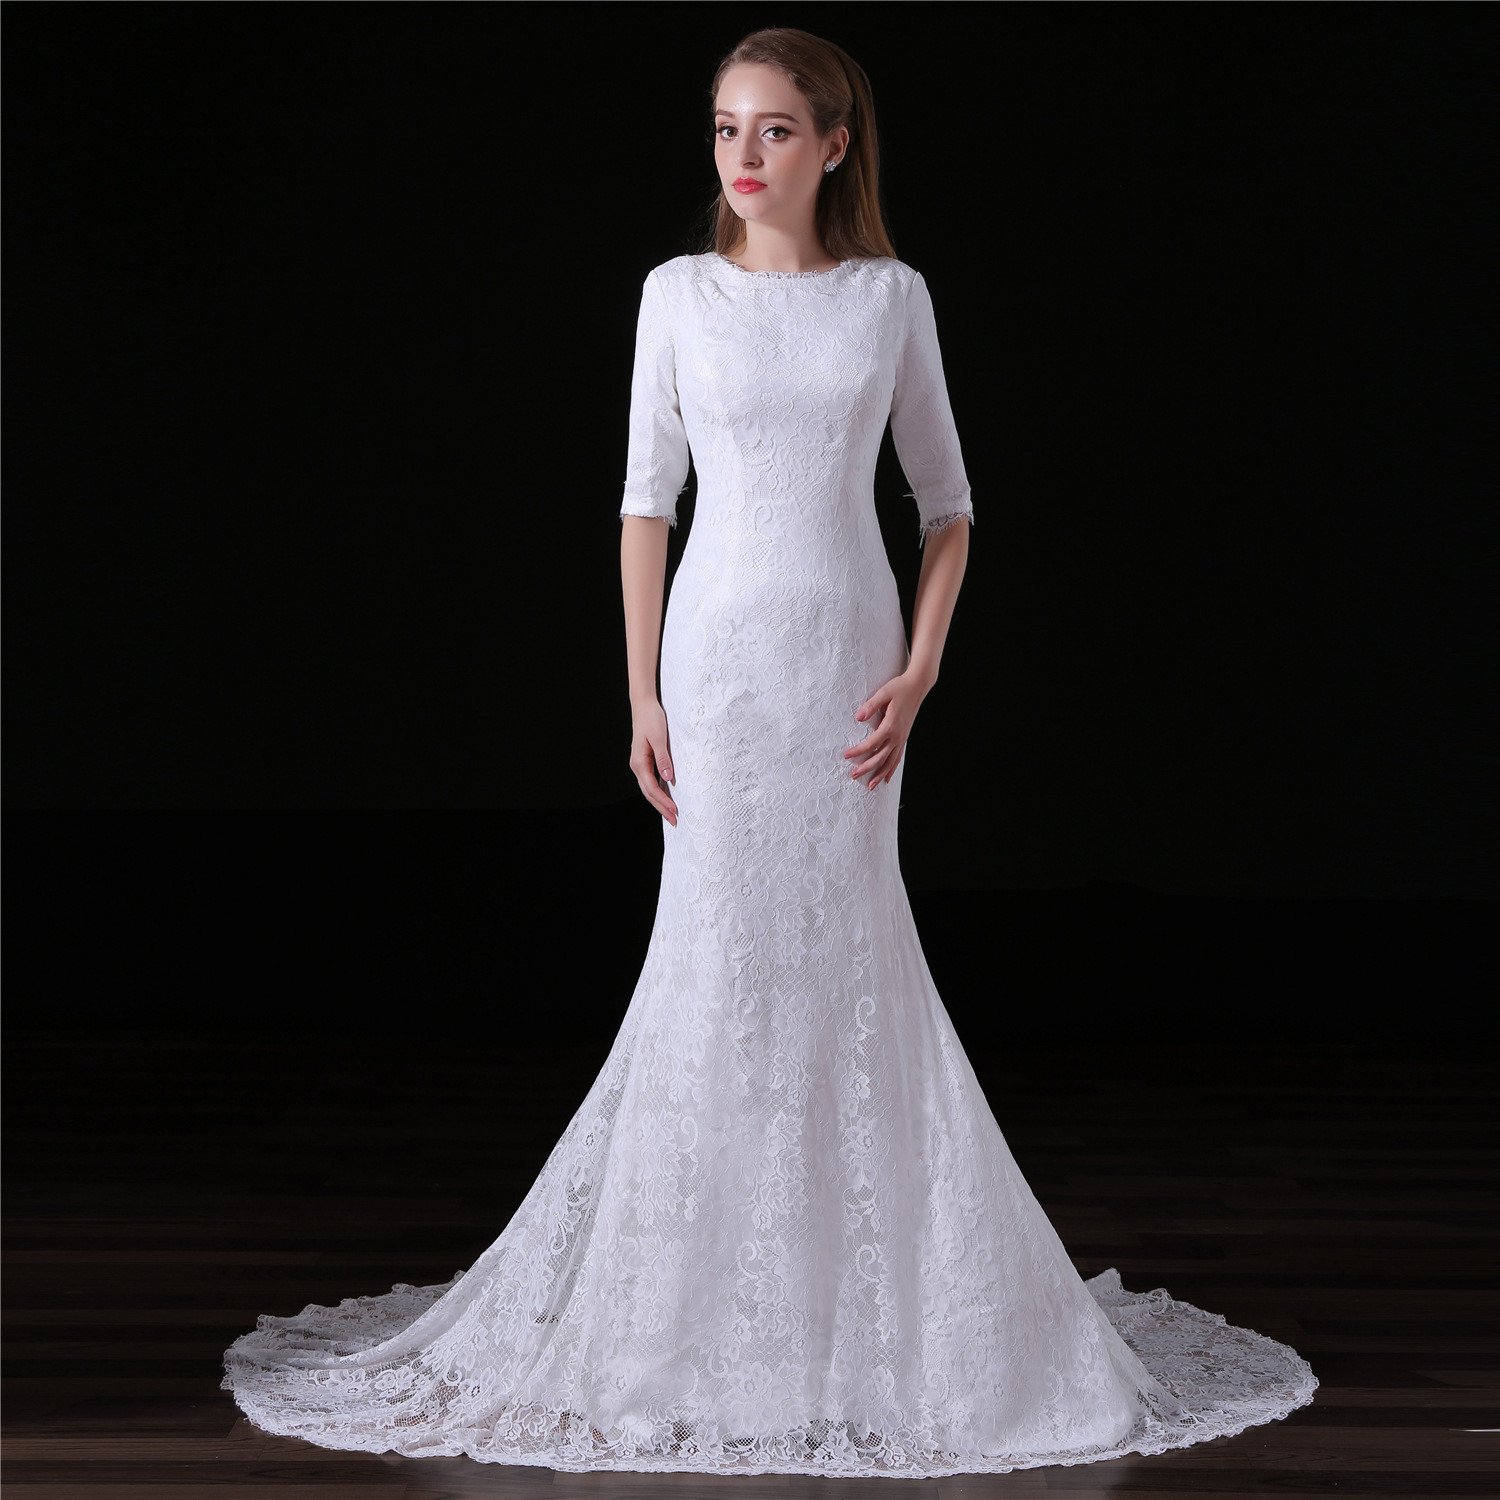 Simple Mermaid Wedding Dress Lace Bridal Gown With Train